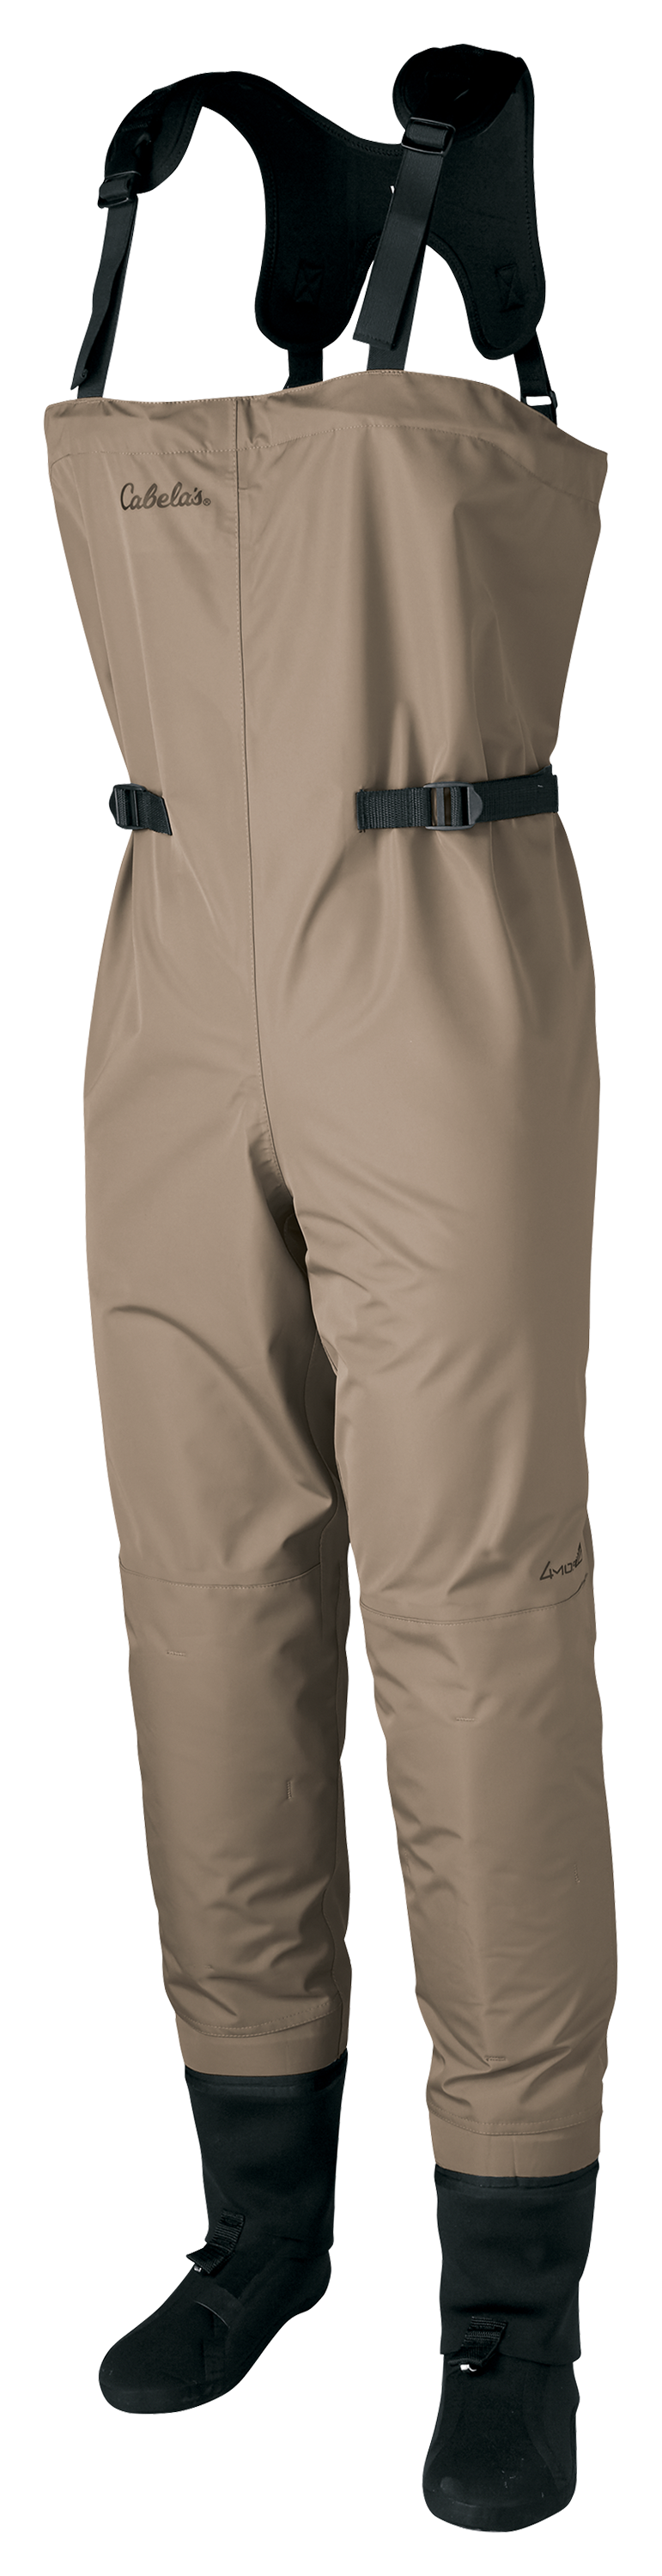 Cabela's Premium Breathable Stocking-Foot Fishing Waders, 50% OFF